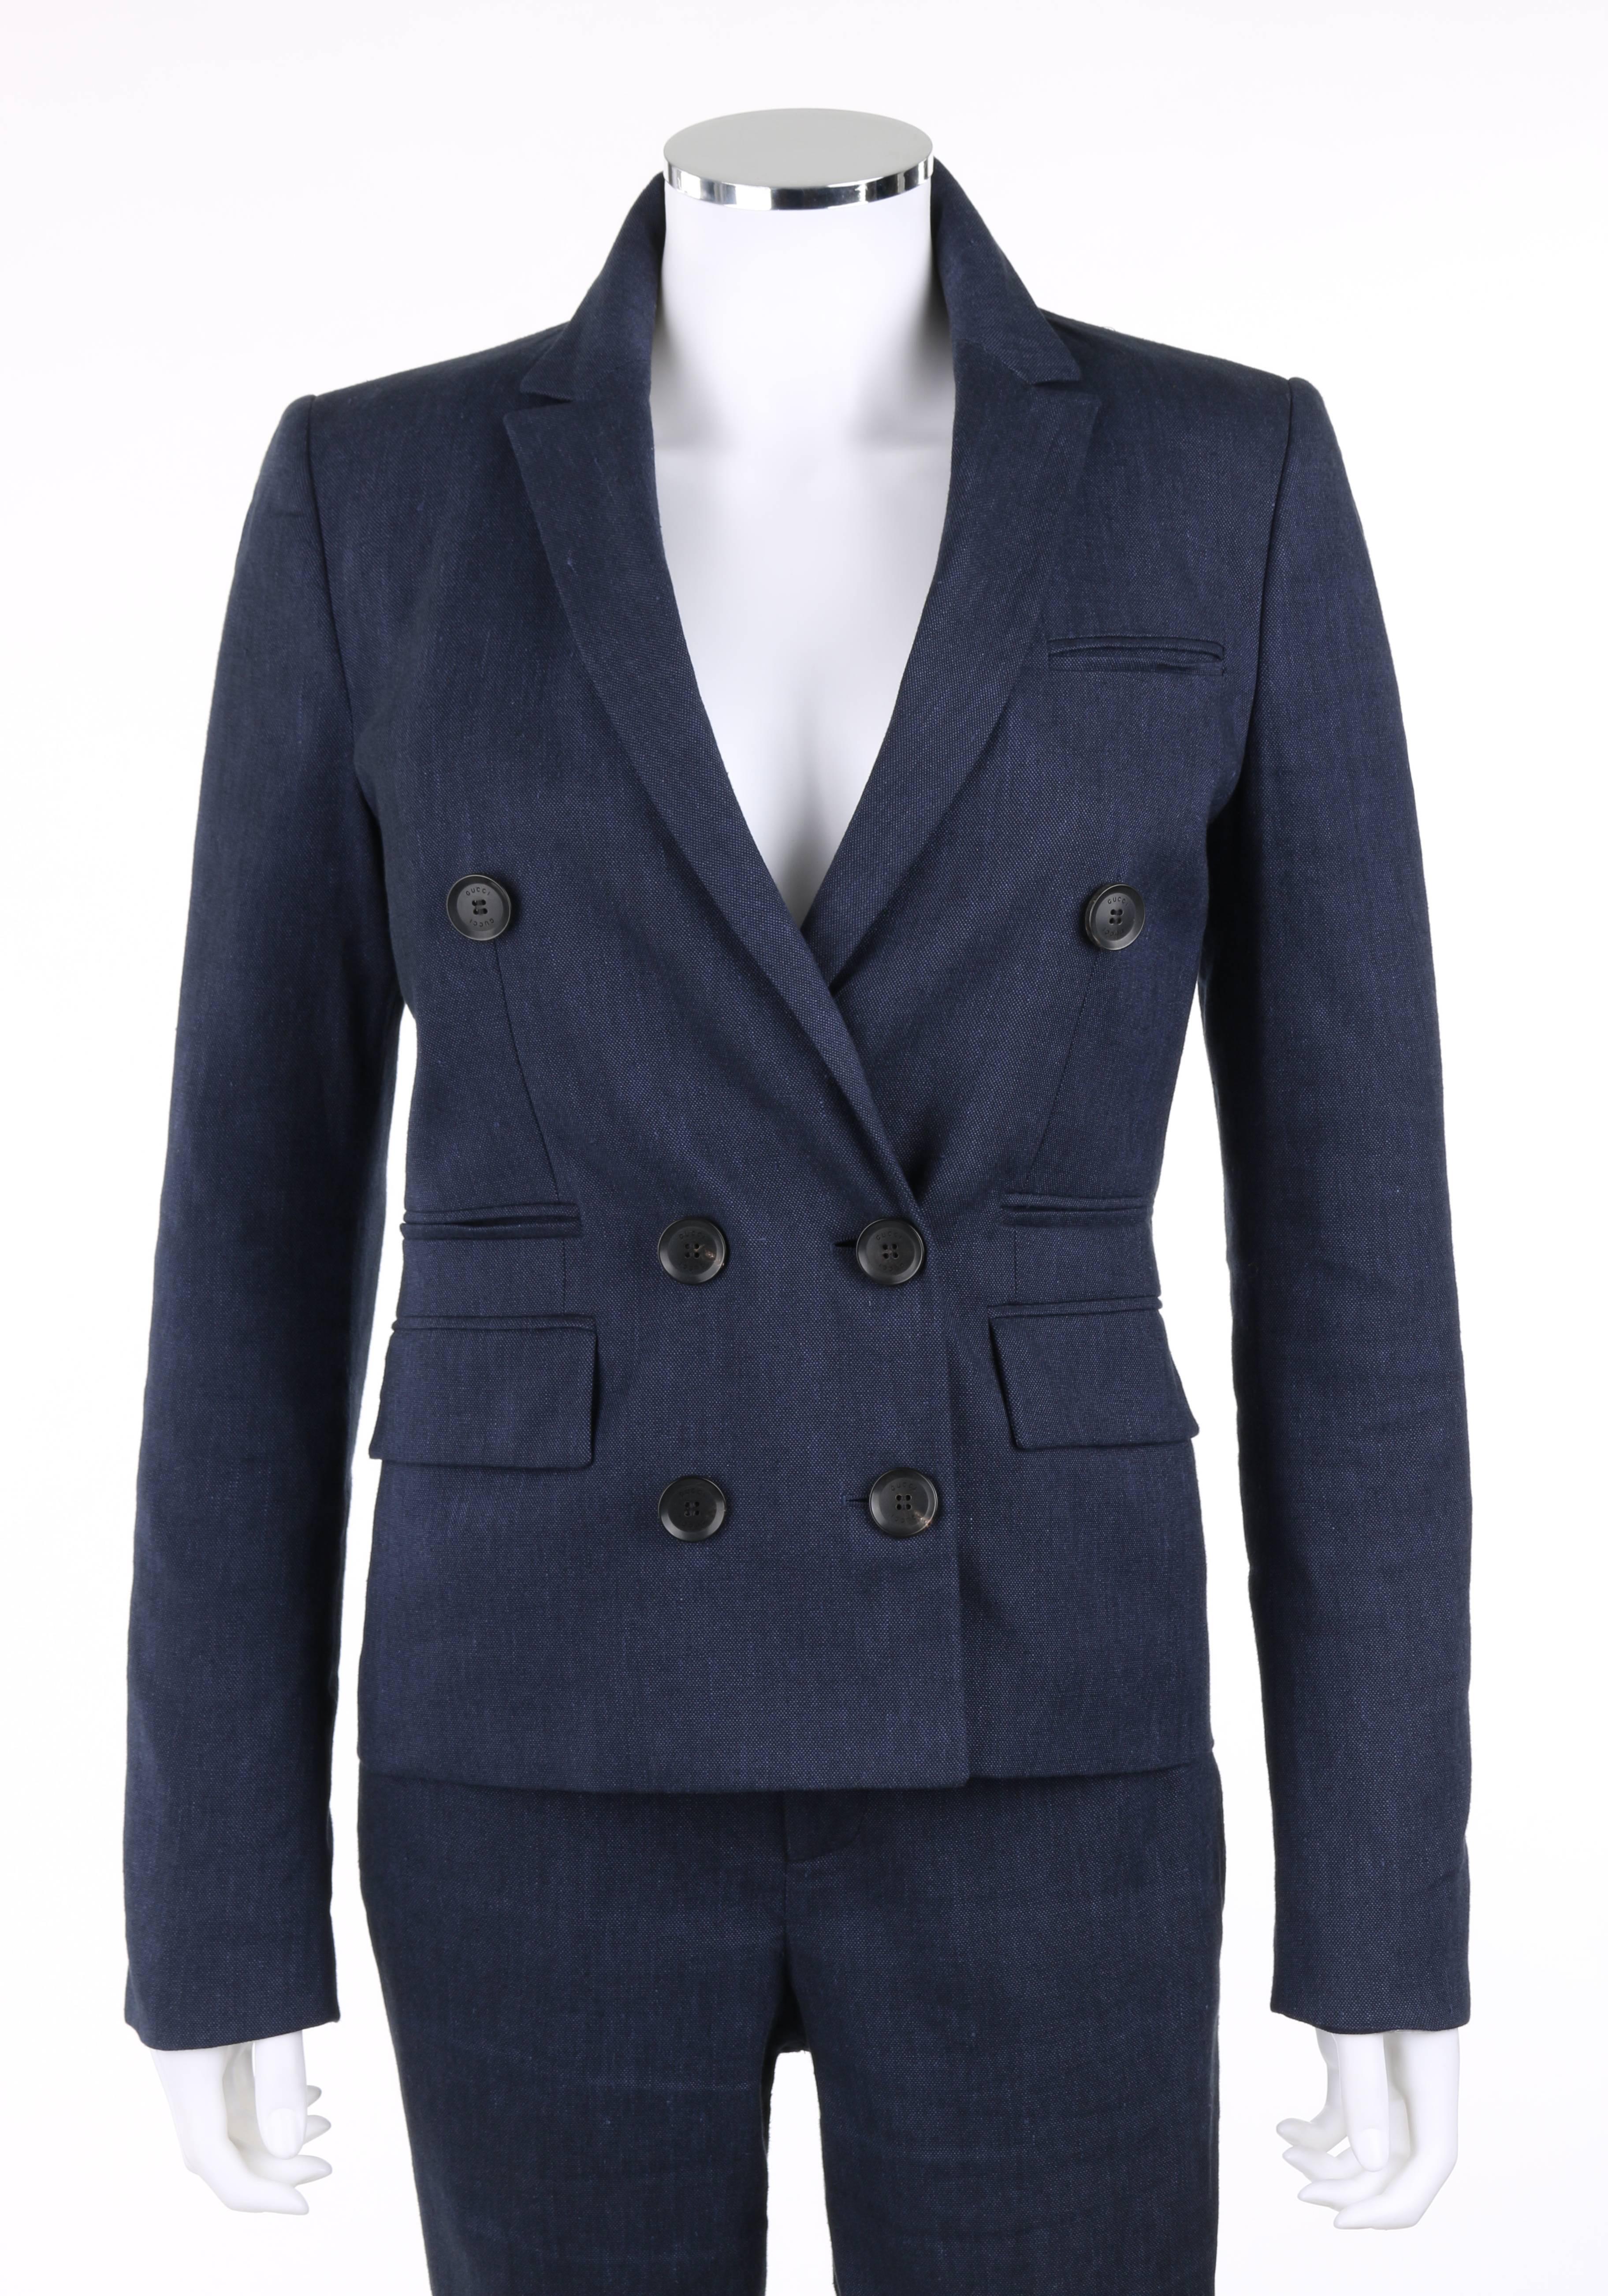 Gucci Pre-Fall 2014 2 Piece dark blue linen blend pants suit. Double breasted jacket. Long sleeves with four mock button closures at cuff. Six front buttons with two exterior and single interior button closures. Notched lapel collar. Two double welt